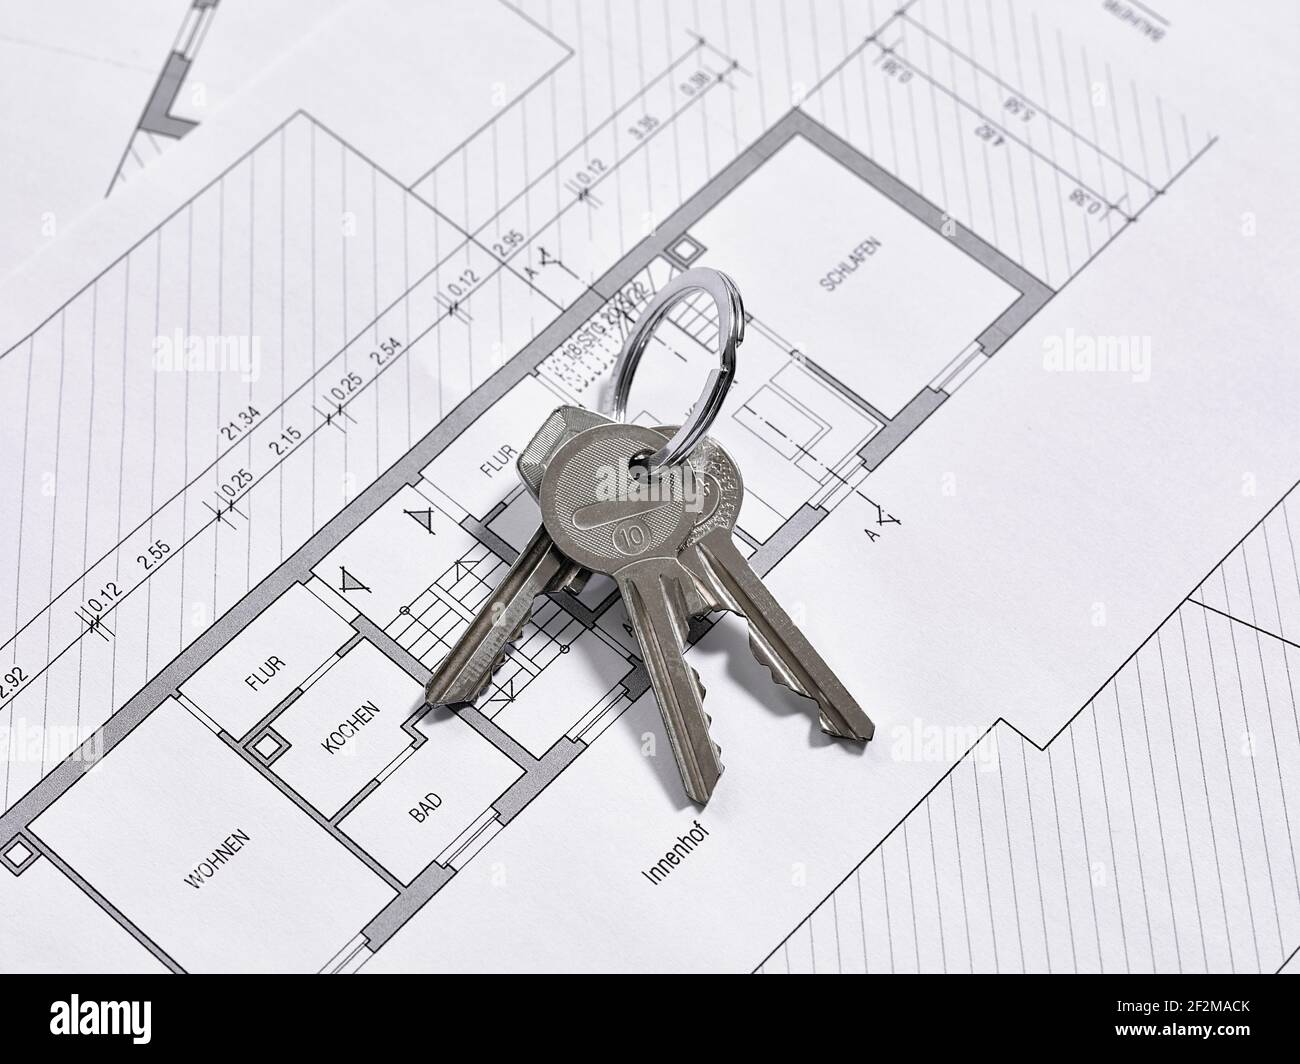 Bunch of keys lies on a floor plan drawing of an apartment Stock Photo